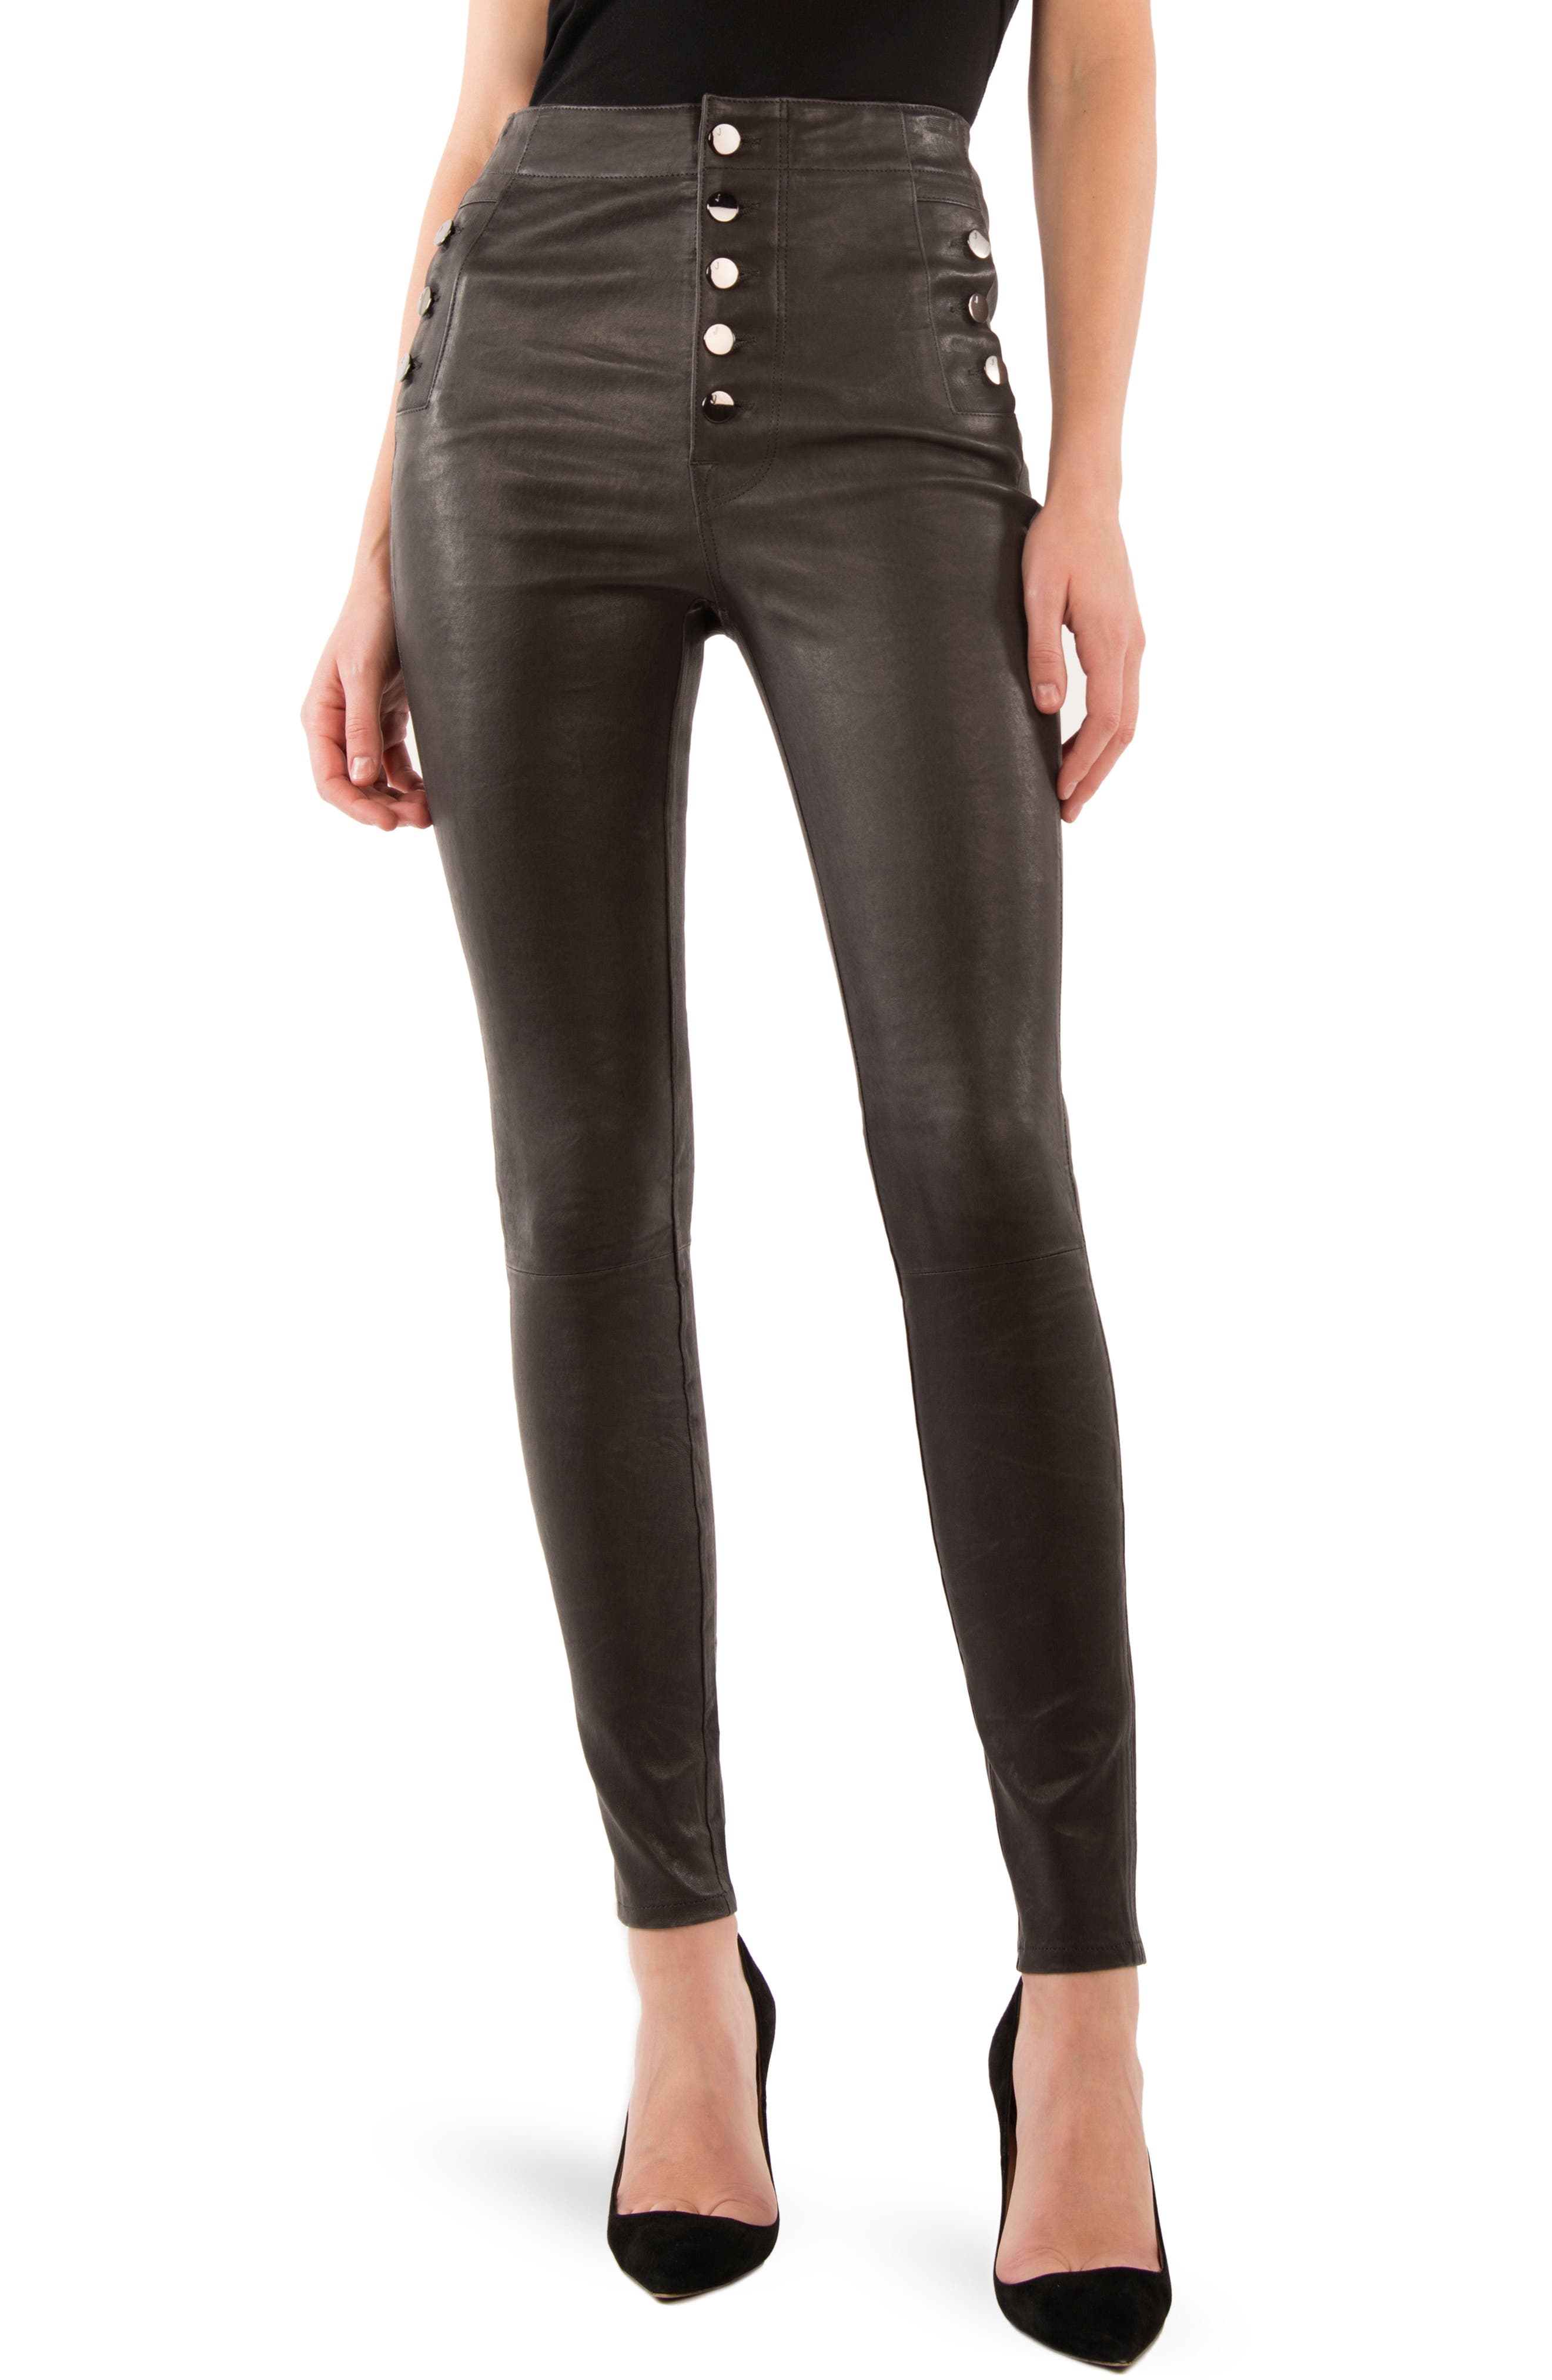 leather pants brands